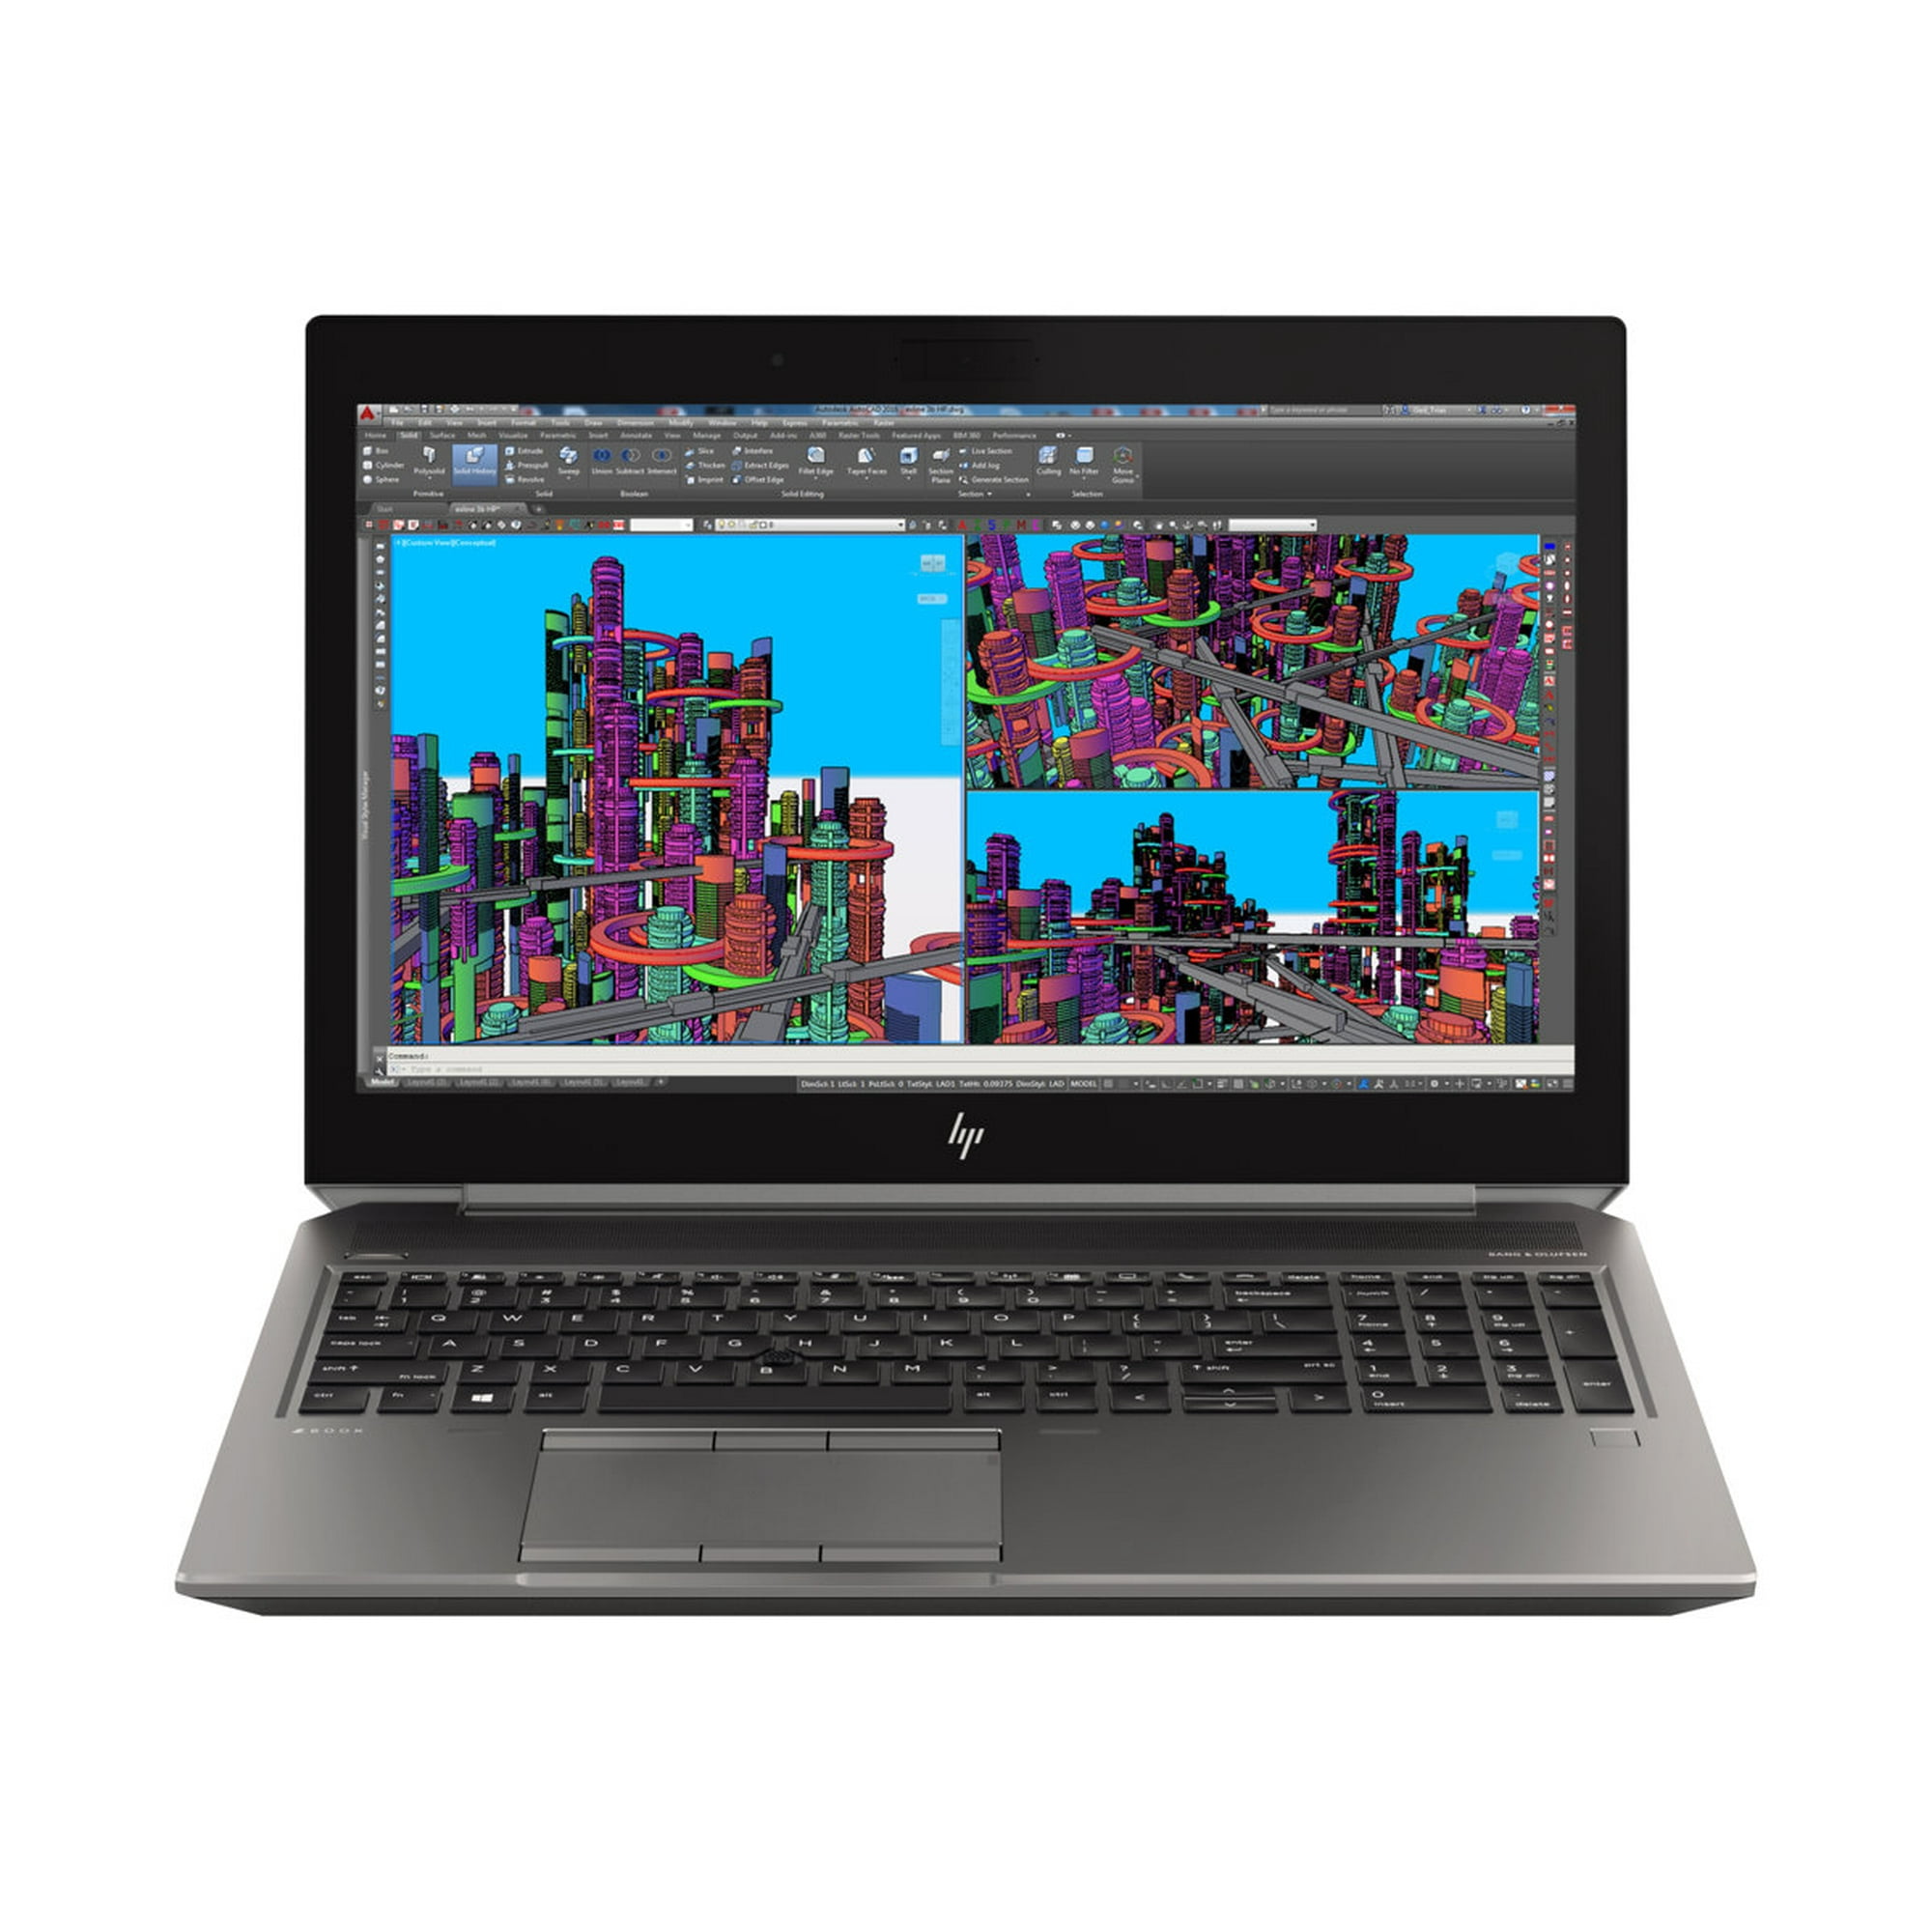 HP ZBook 15 G5 Mobile Workstation - Intel Core i7 8750H / 2.2 GHz